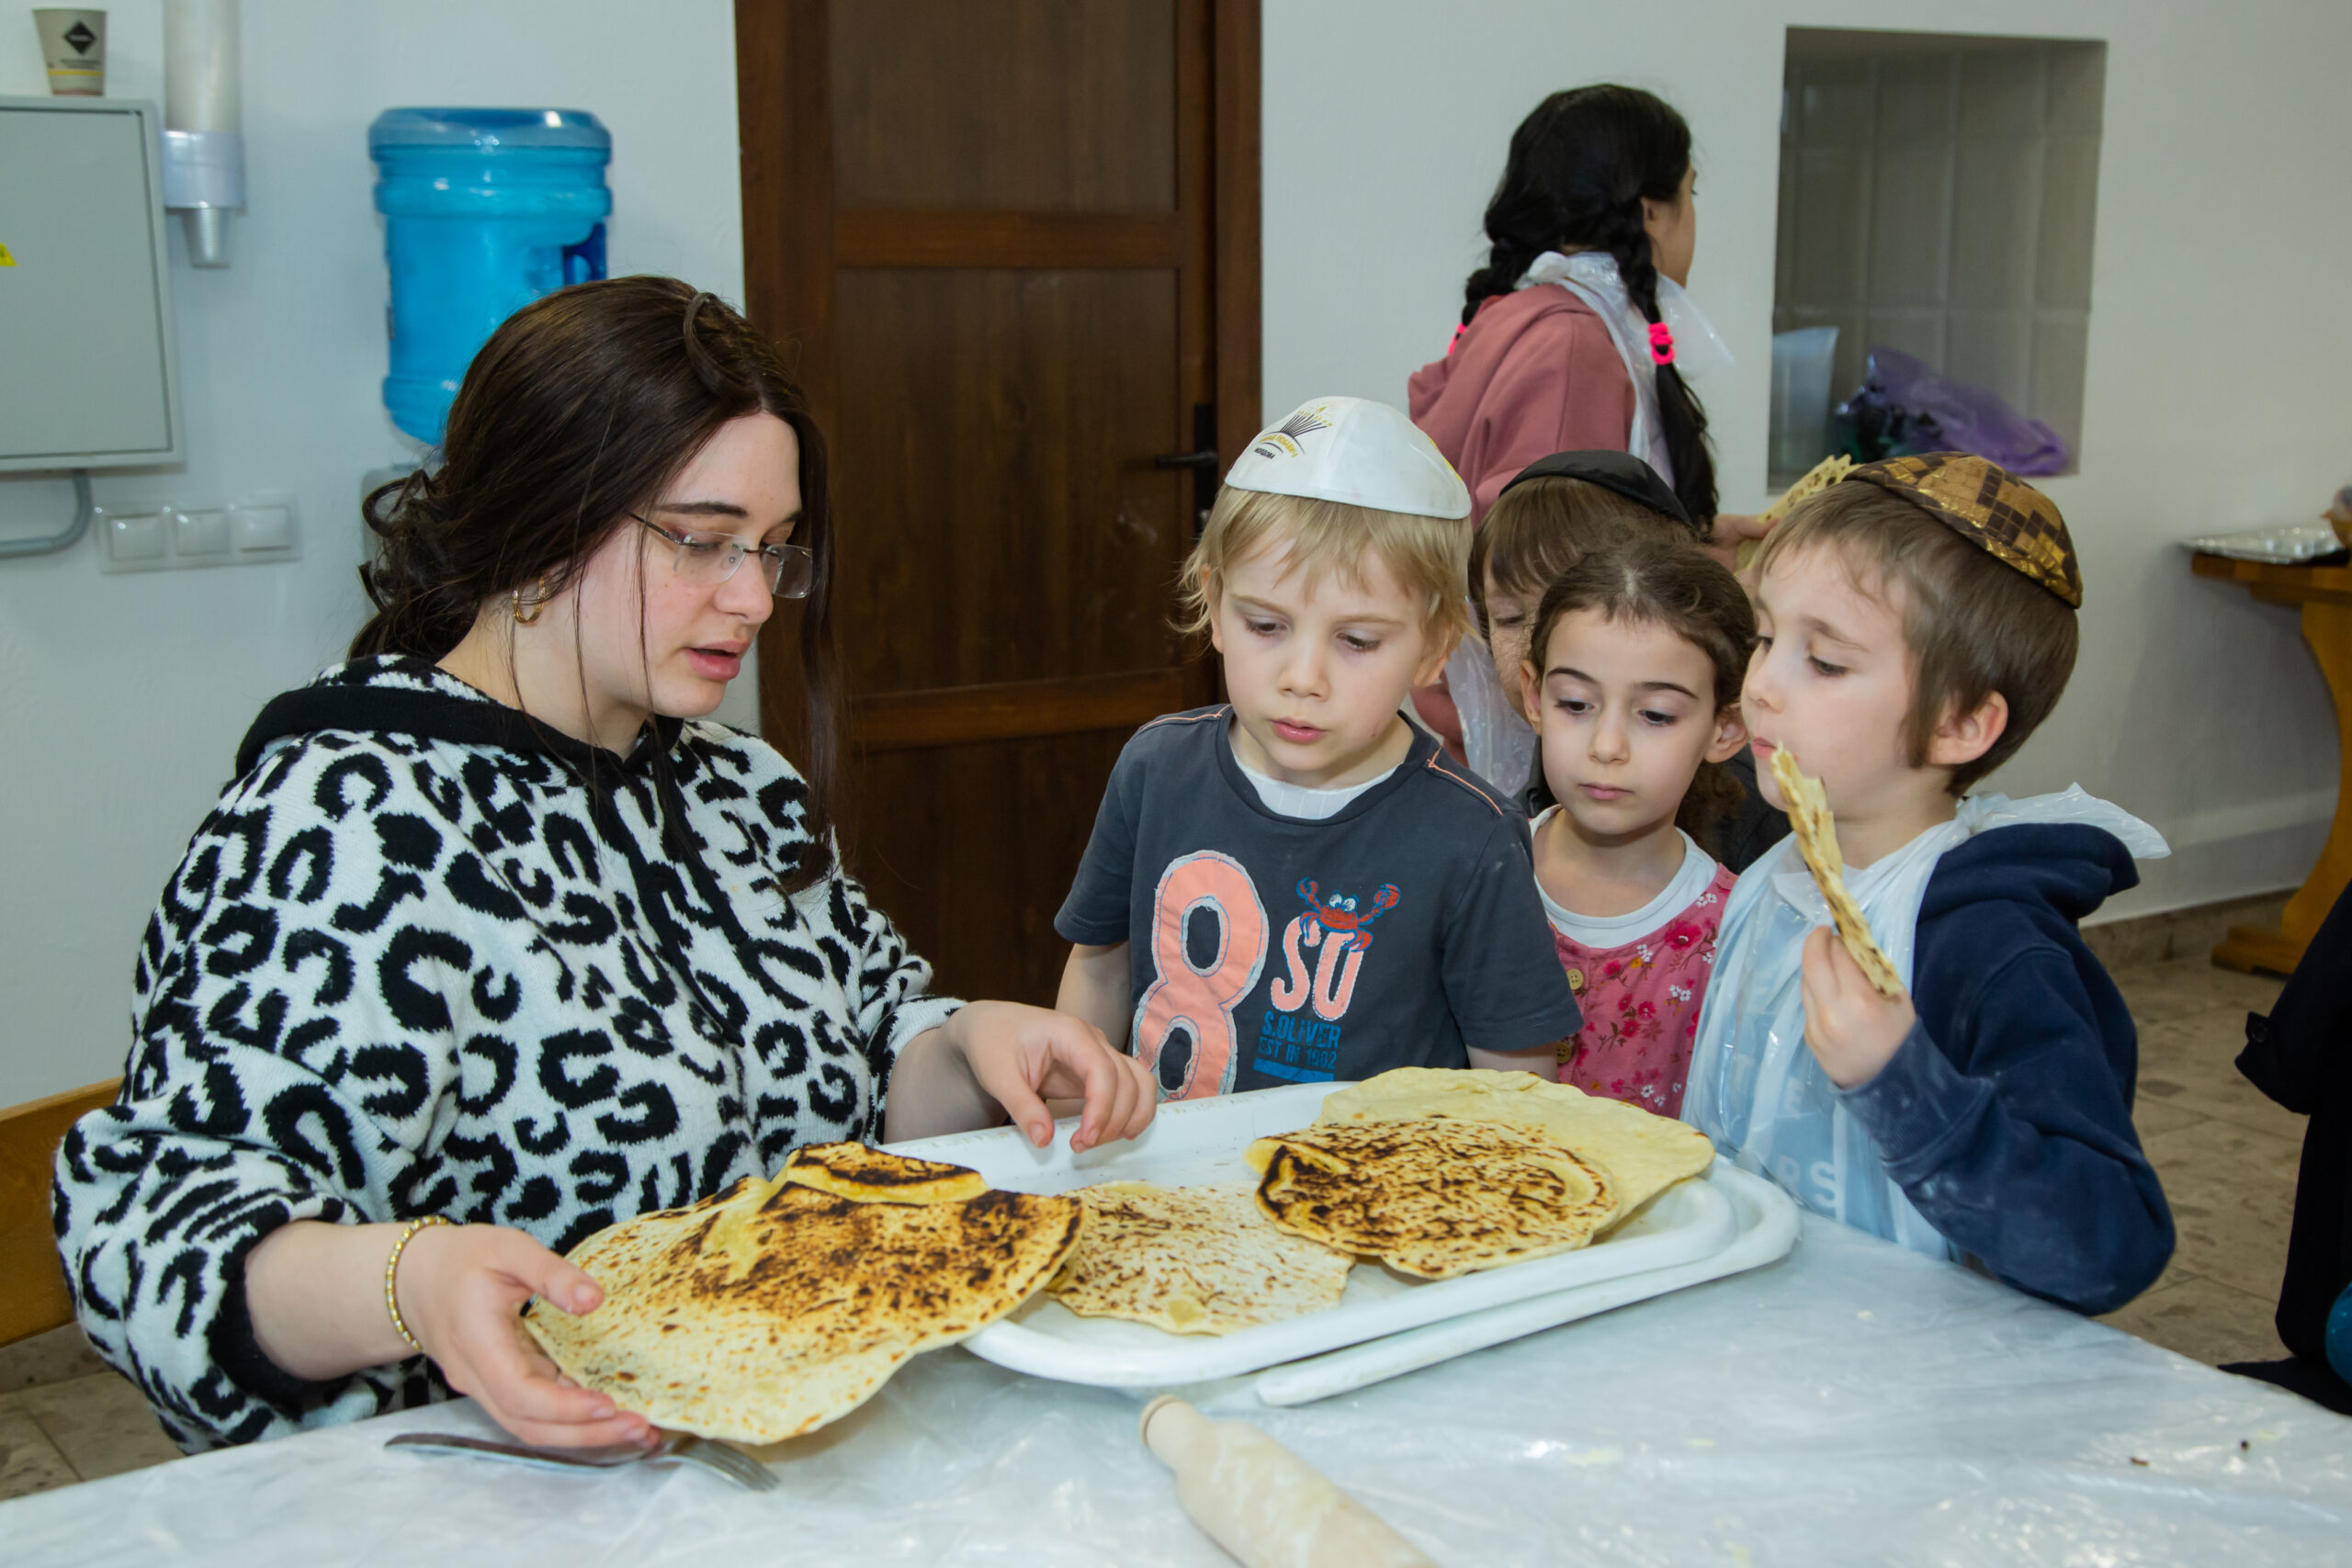 Our synagogue recently hosted a wonderful event for kindergarten and Sunday School students.